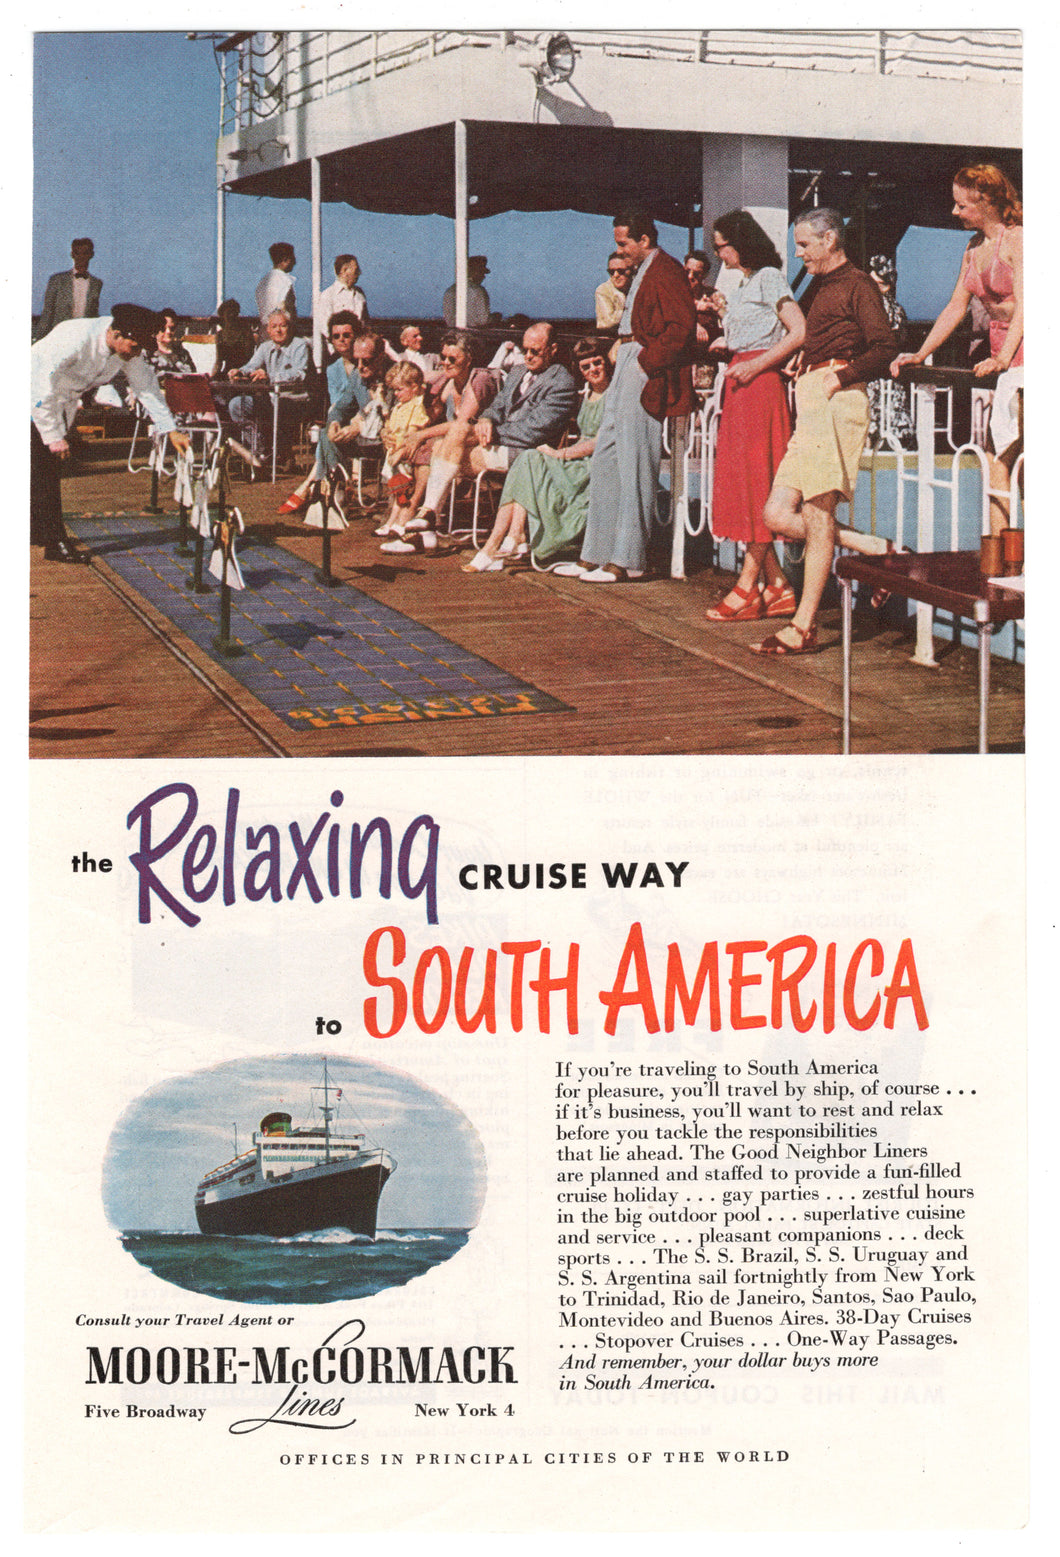 Moore-McCormack Cruise Lines Vintage Ad - (Relaxing to South America) # 341 - 1960's